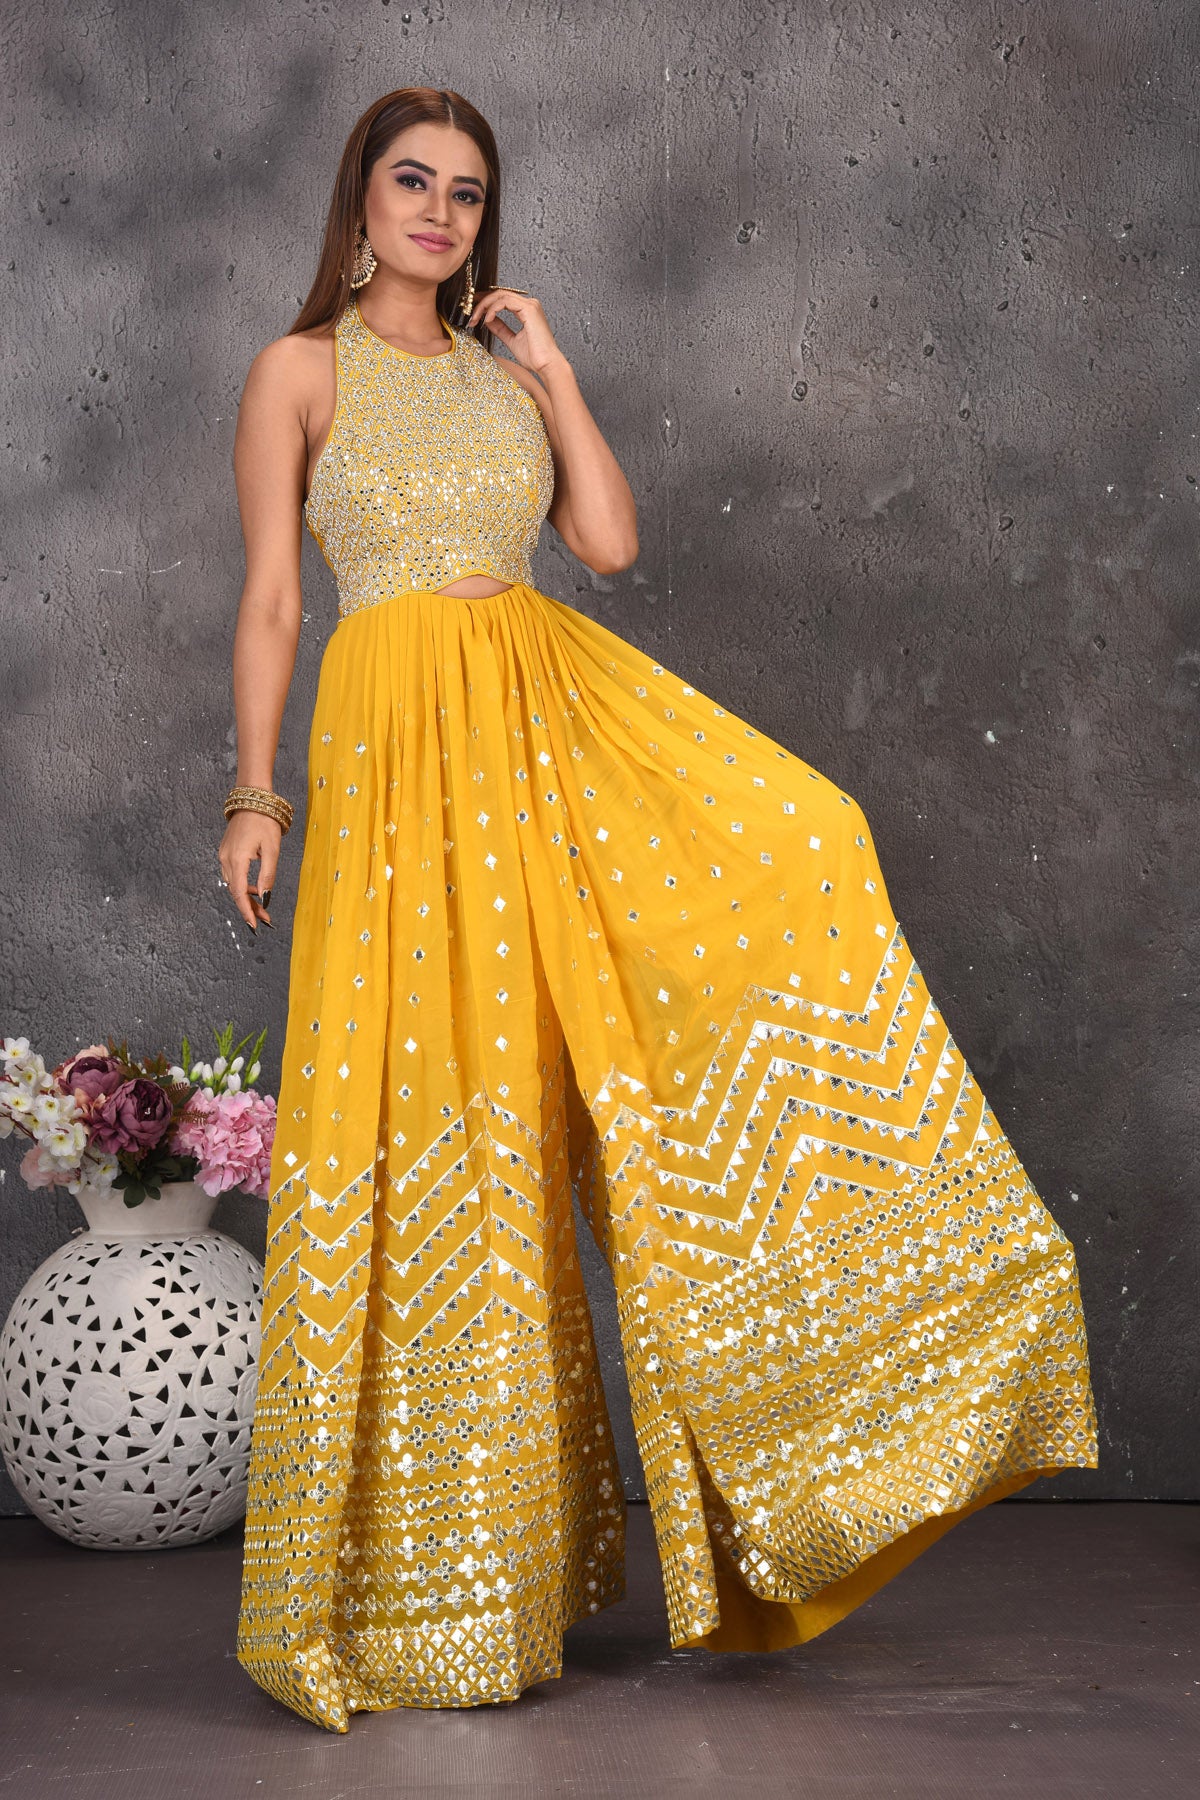 Shop beautiful yellow halter neck mirror embroidery jumpsuit online in USA. Look stylish at parties and wedding festivities in designer dresses, Indowestern outfits, Anarkali suits, wedding lehengas, palazzo suits, sharara suits from Pure Elegance Indian clothing store in USA.-jumpsuit